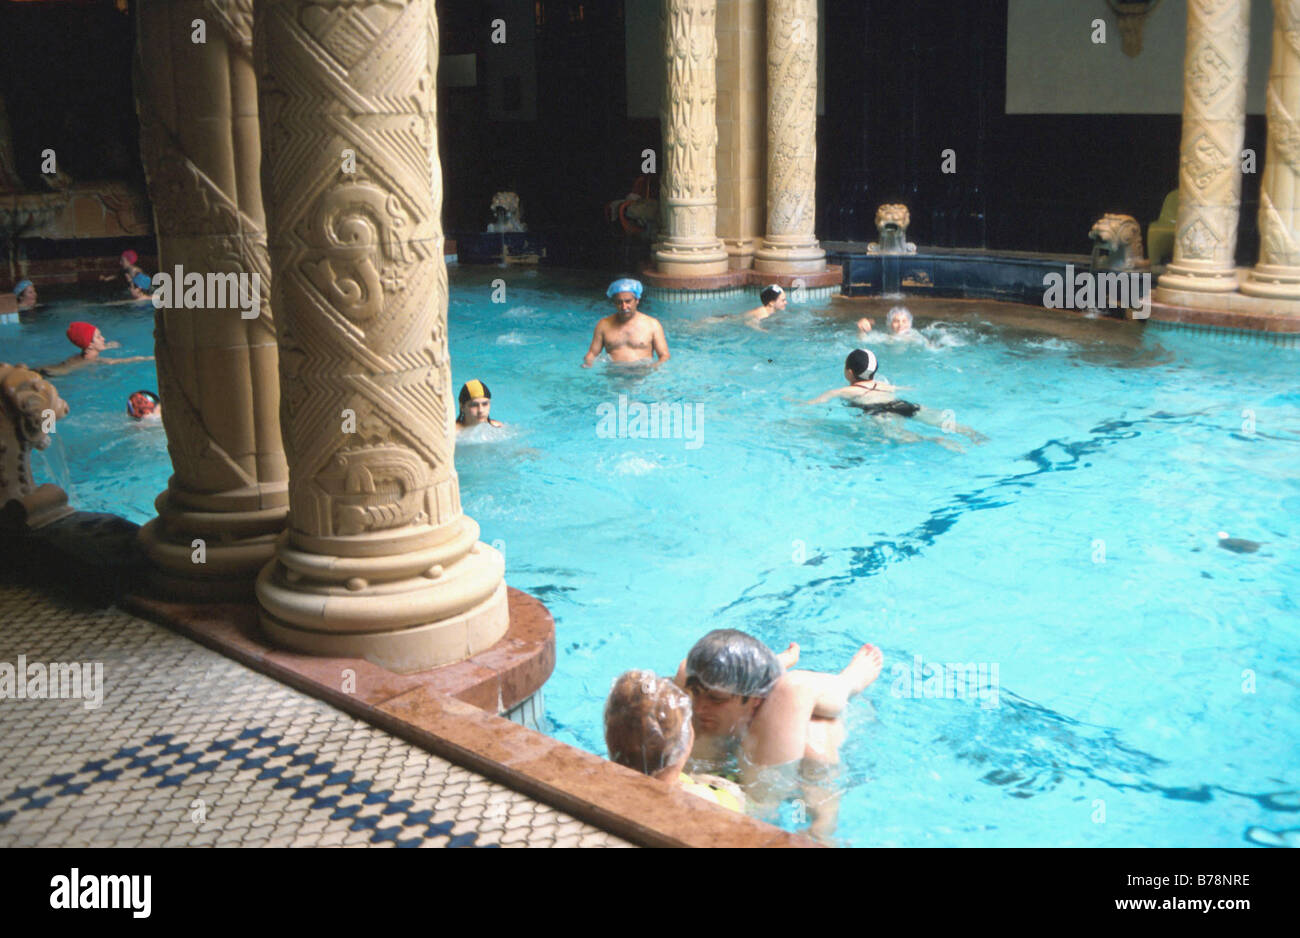 HUNGARY. INTERIOR OF A PUBLIC BATH HOUSE IN BUDAPEST. Photo by Julio Etchart Stock Photo